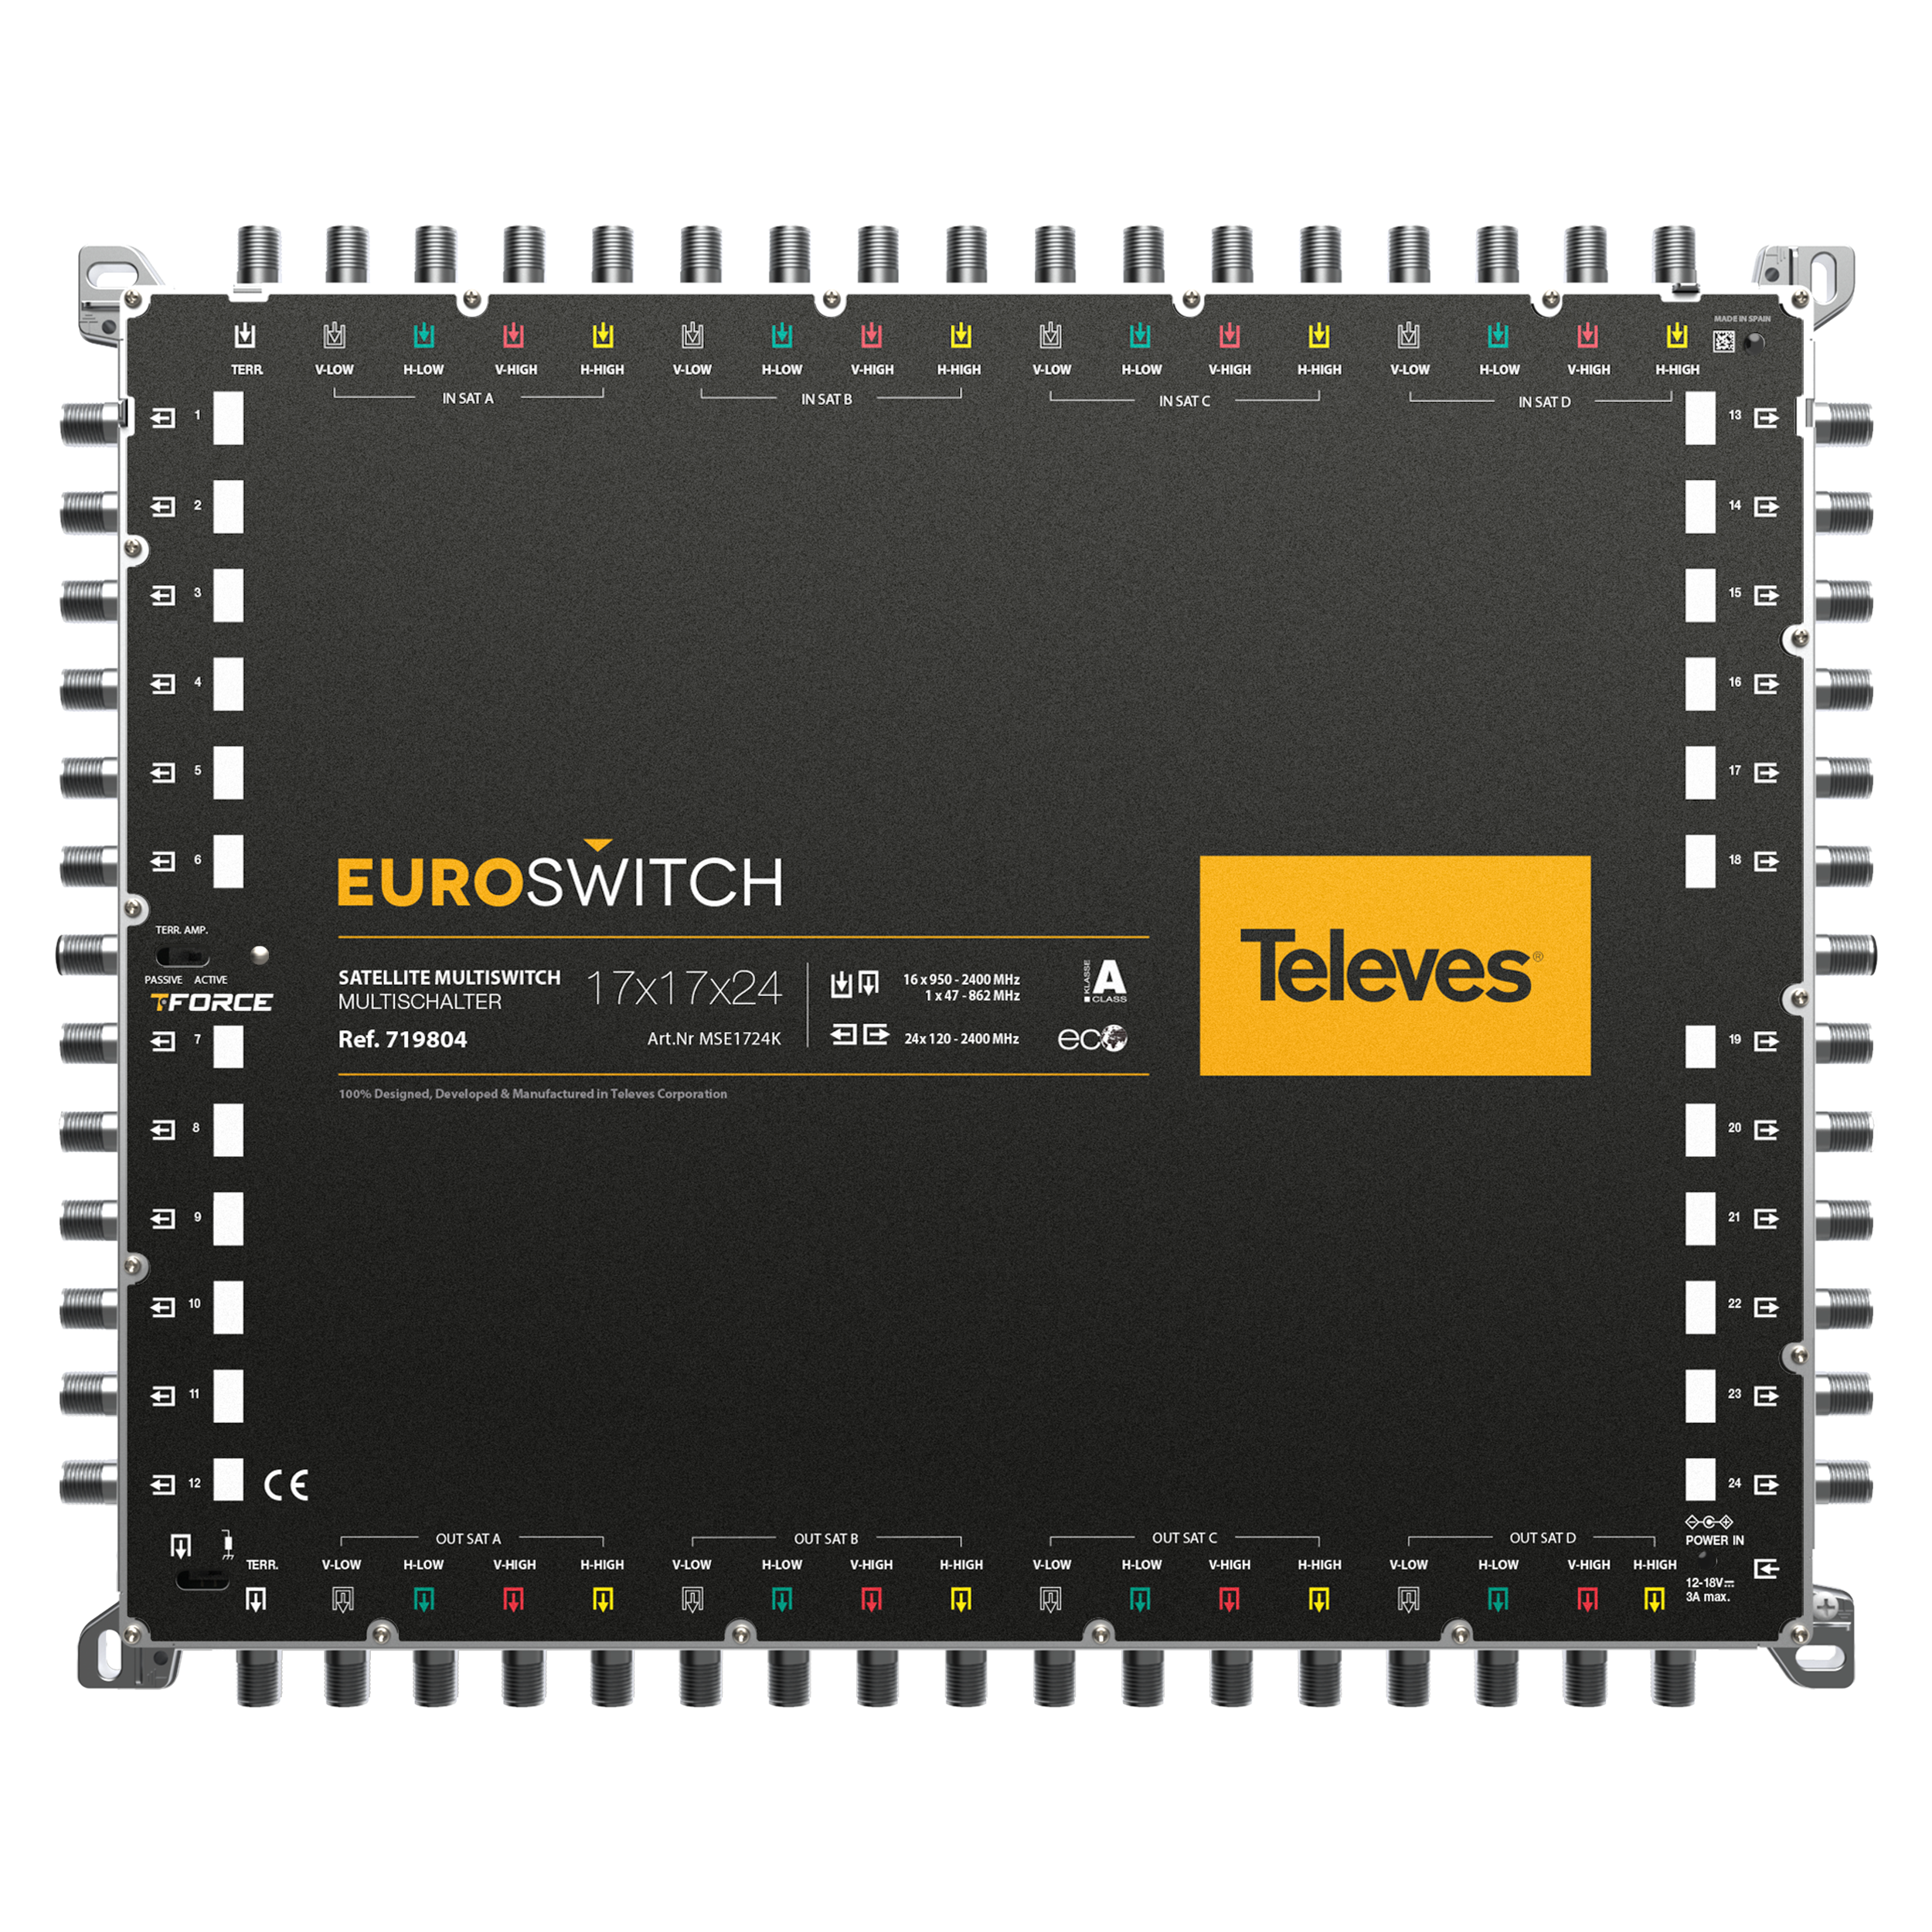 17 in 24 Guss-Multischalter EUROSWITCH, kask. ohne NT (MS-NT1228)